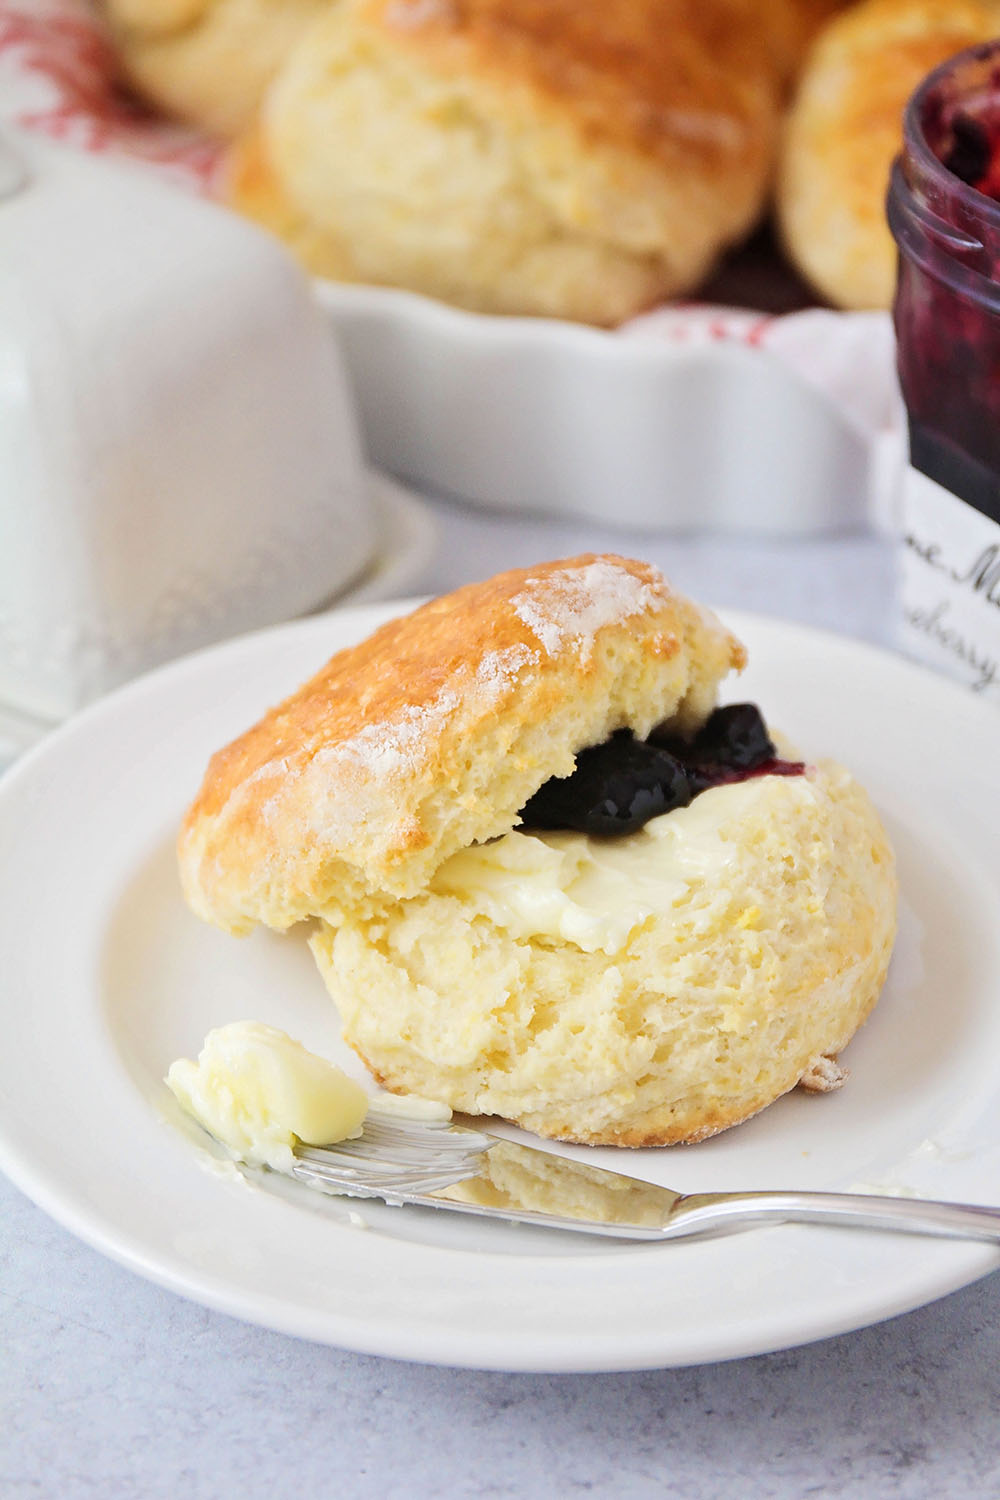 These scones are perfectly light and tender, and totally delicious! Paul Hollywood's recipe makes the ideal scone!